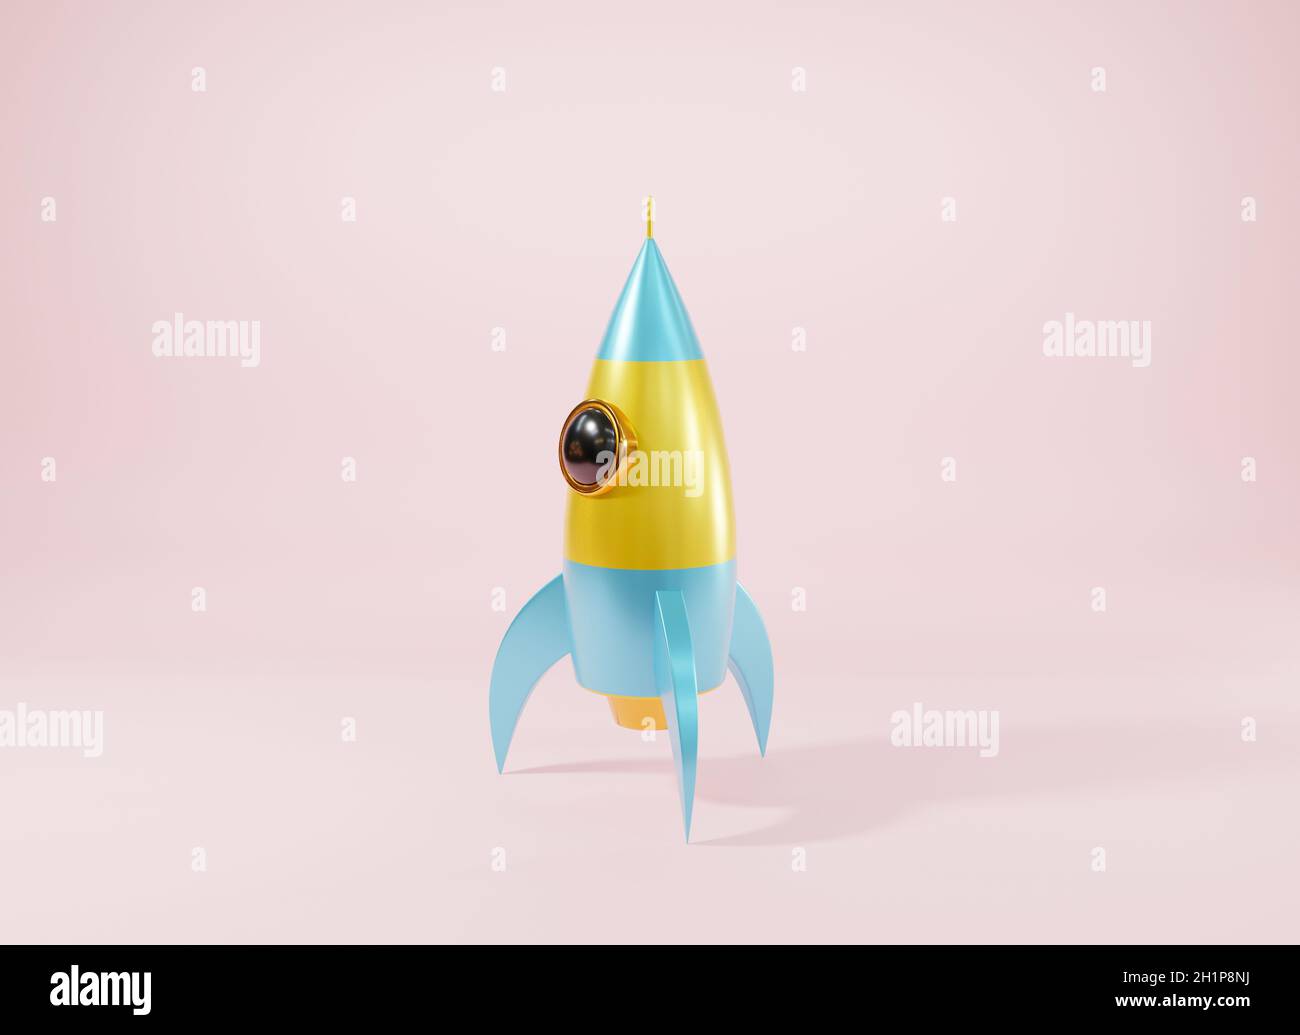 Rocket spaceship antique style, Model cartoon toy space exploration icon on pink background, Retro fly to the moon and galaxy, 3D rendering illustrati Stock Photo